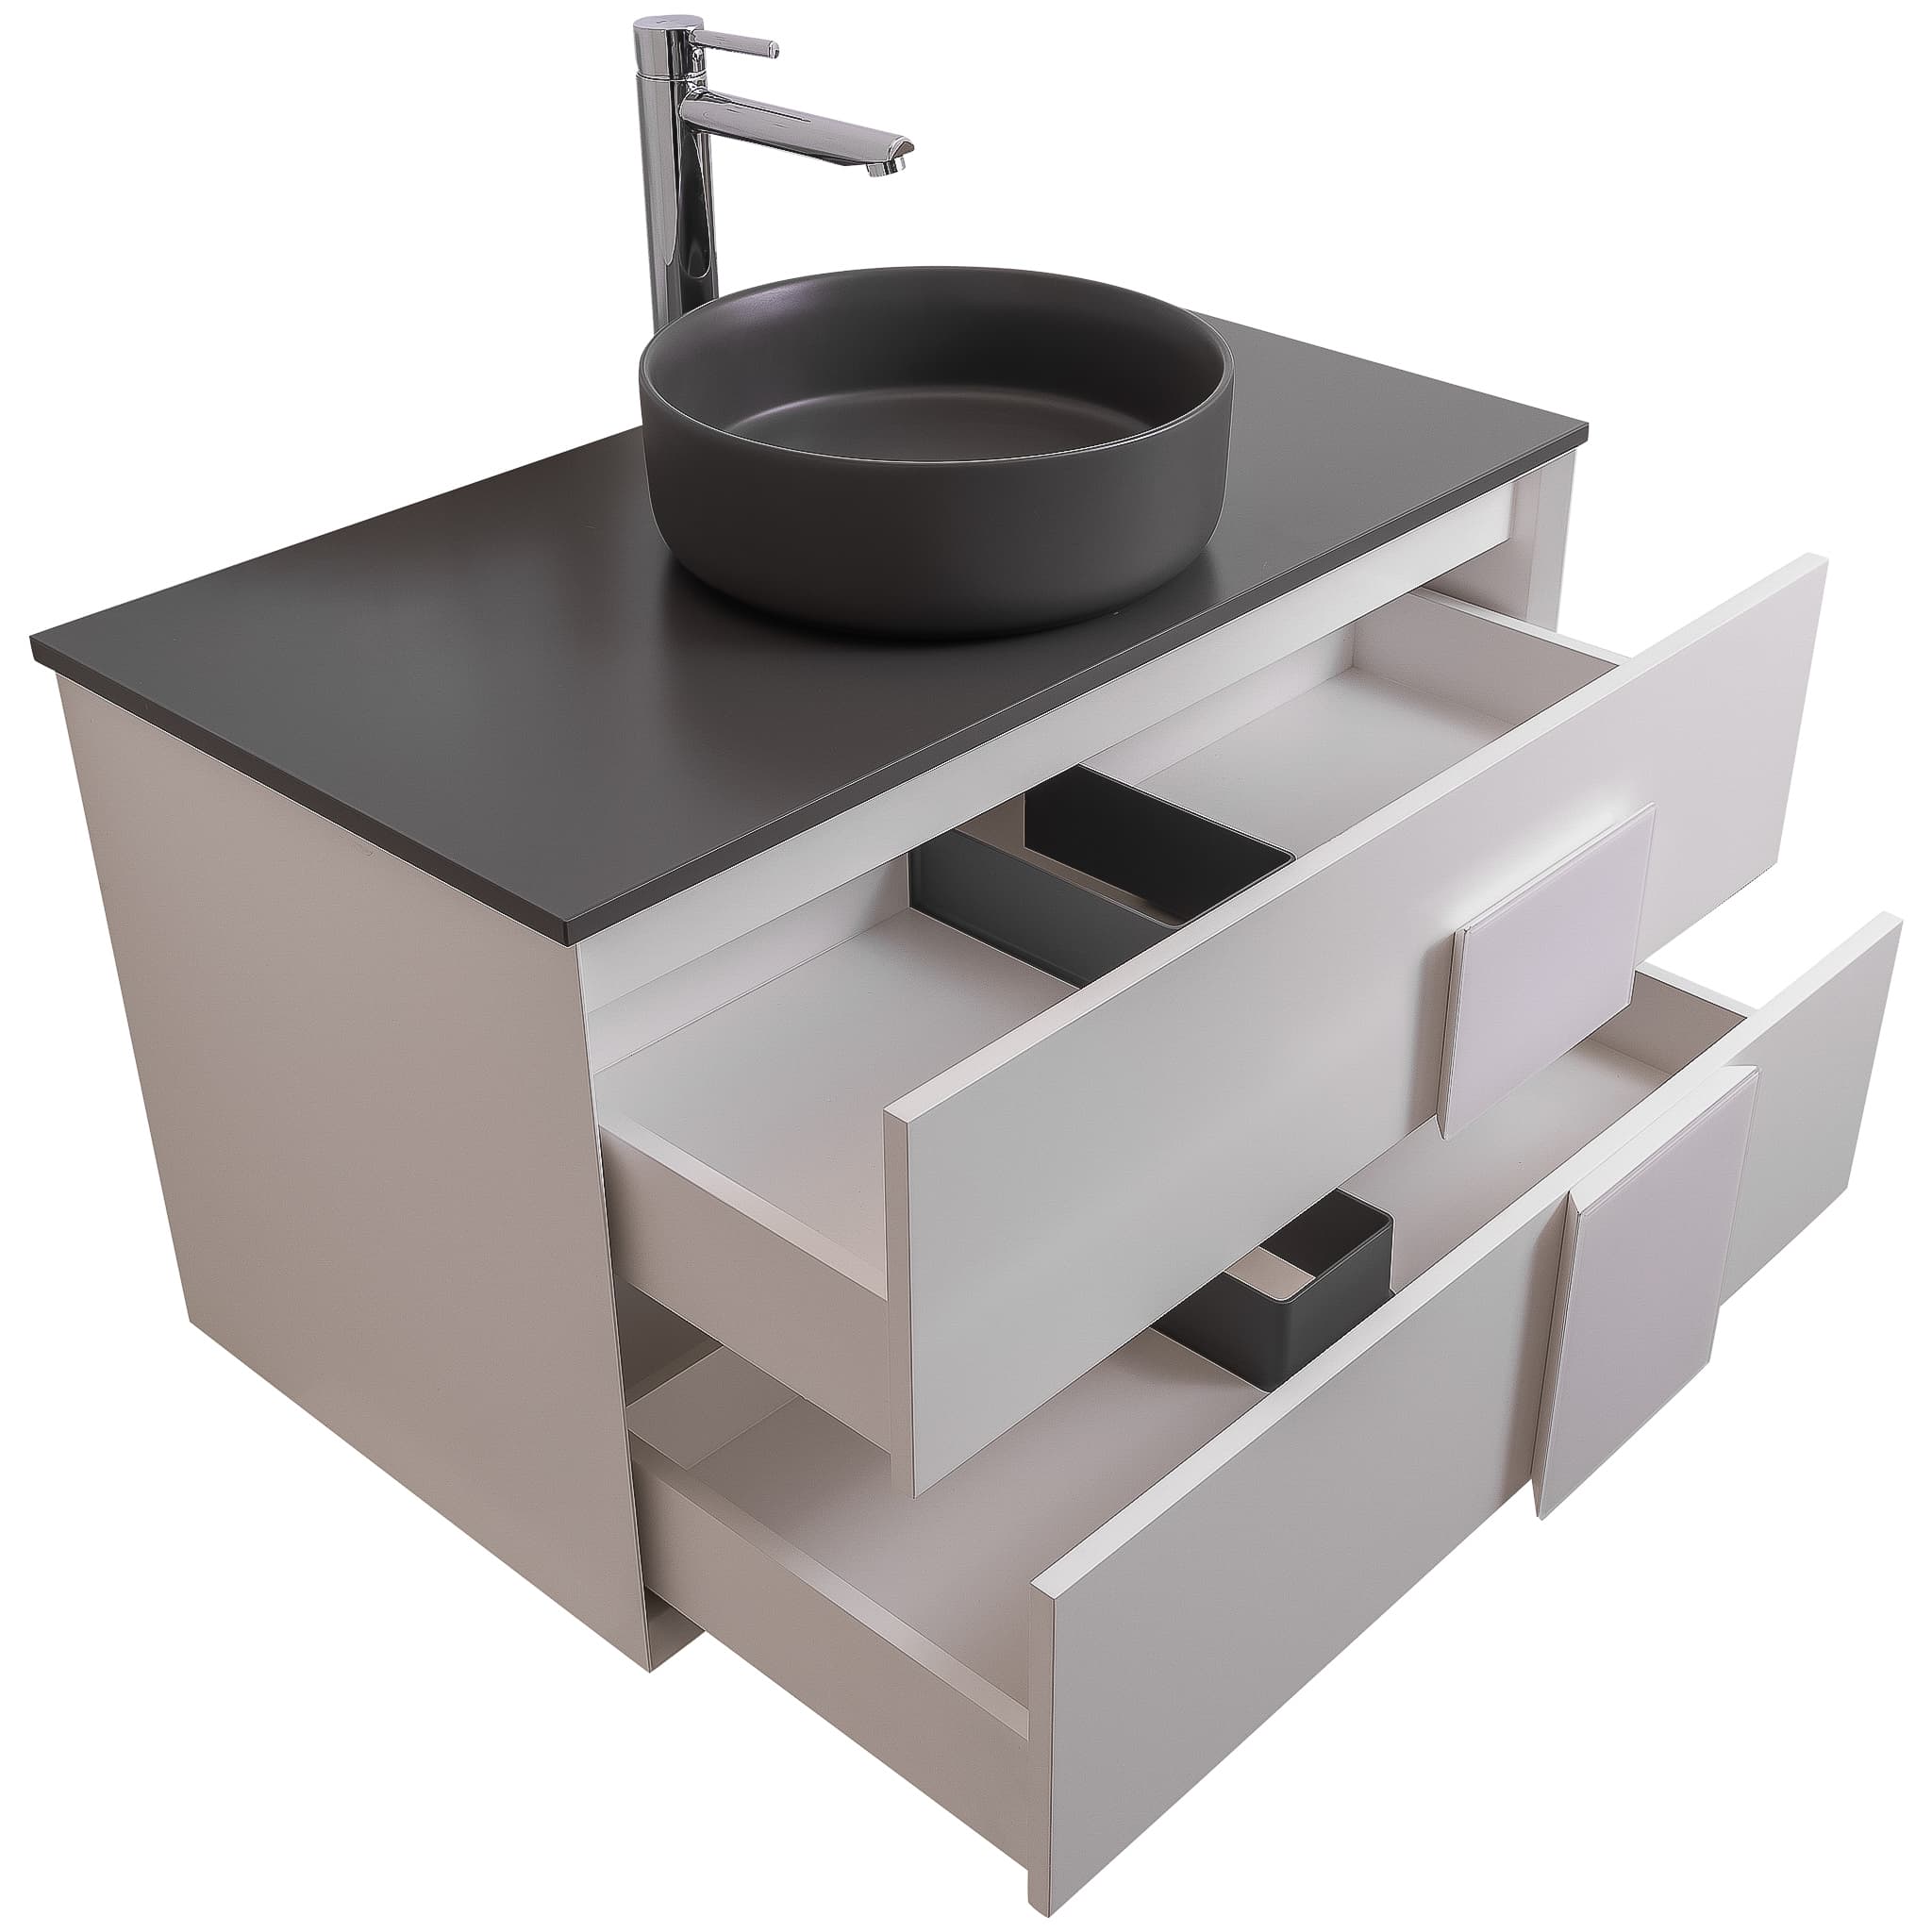 Piazza 31.5 Matte White With White Handle Cabinet, Ares Grey Ceniza Top and Ares Grey Ceniza Ceramic Basin, Wall Mounted Modern Vanity Set